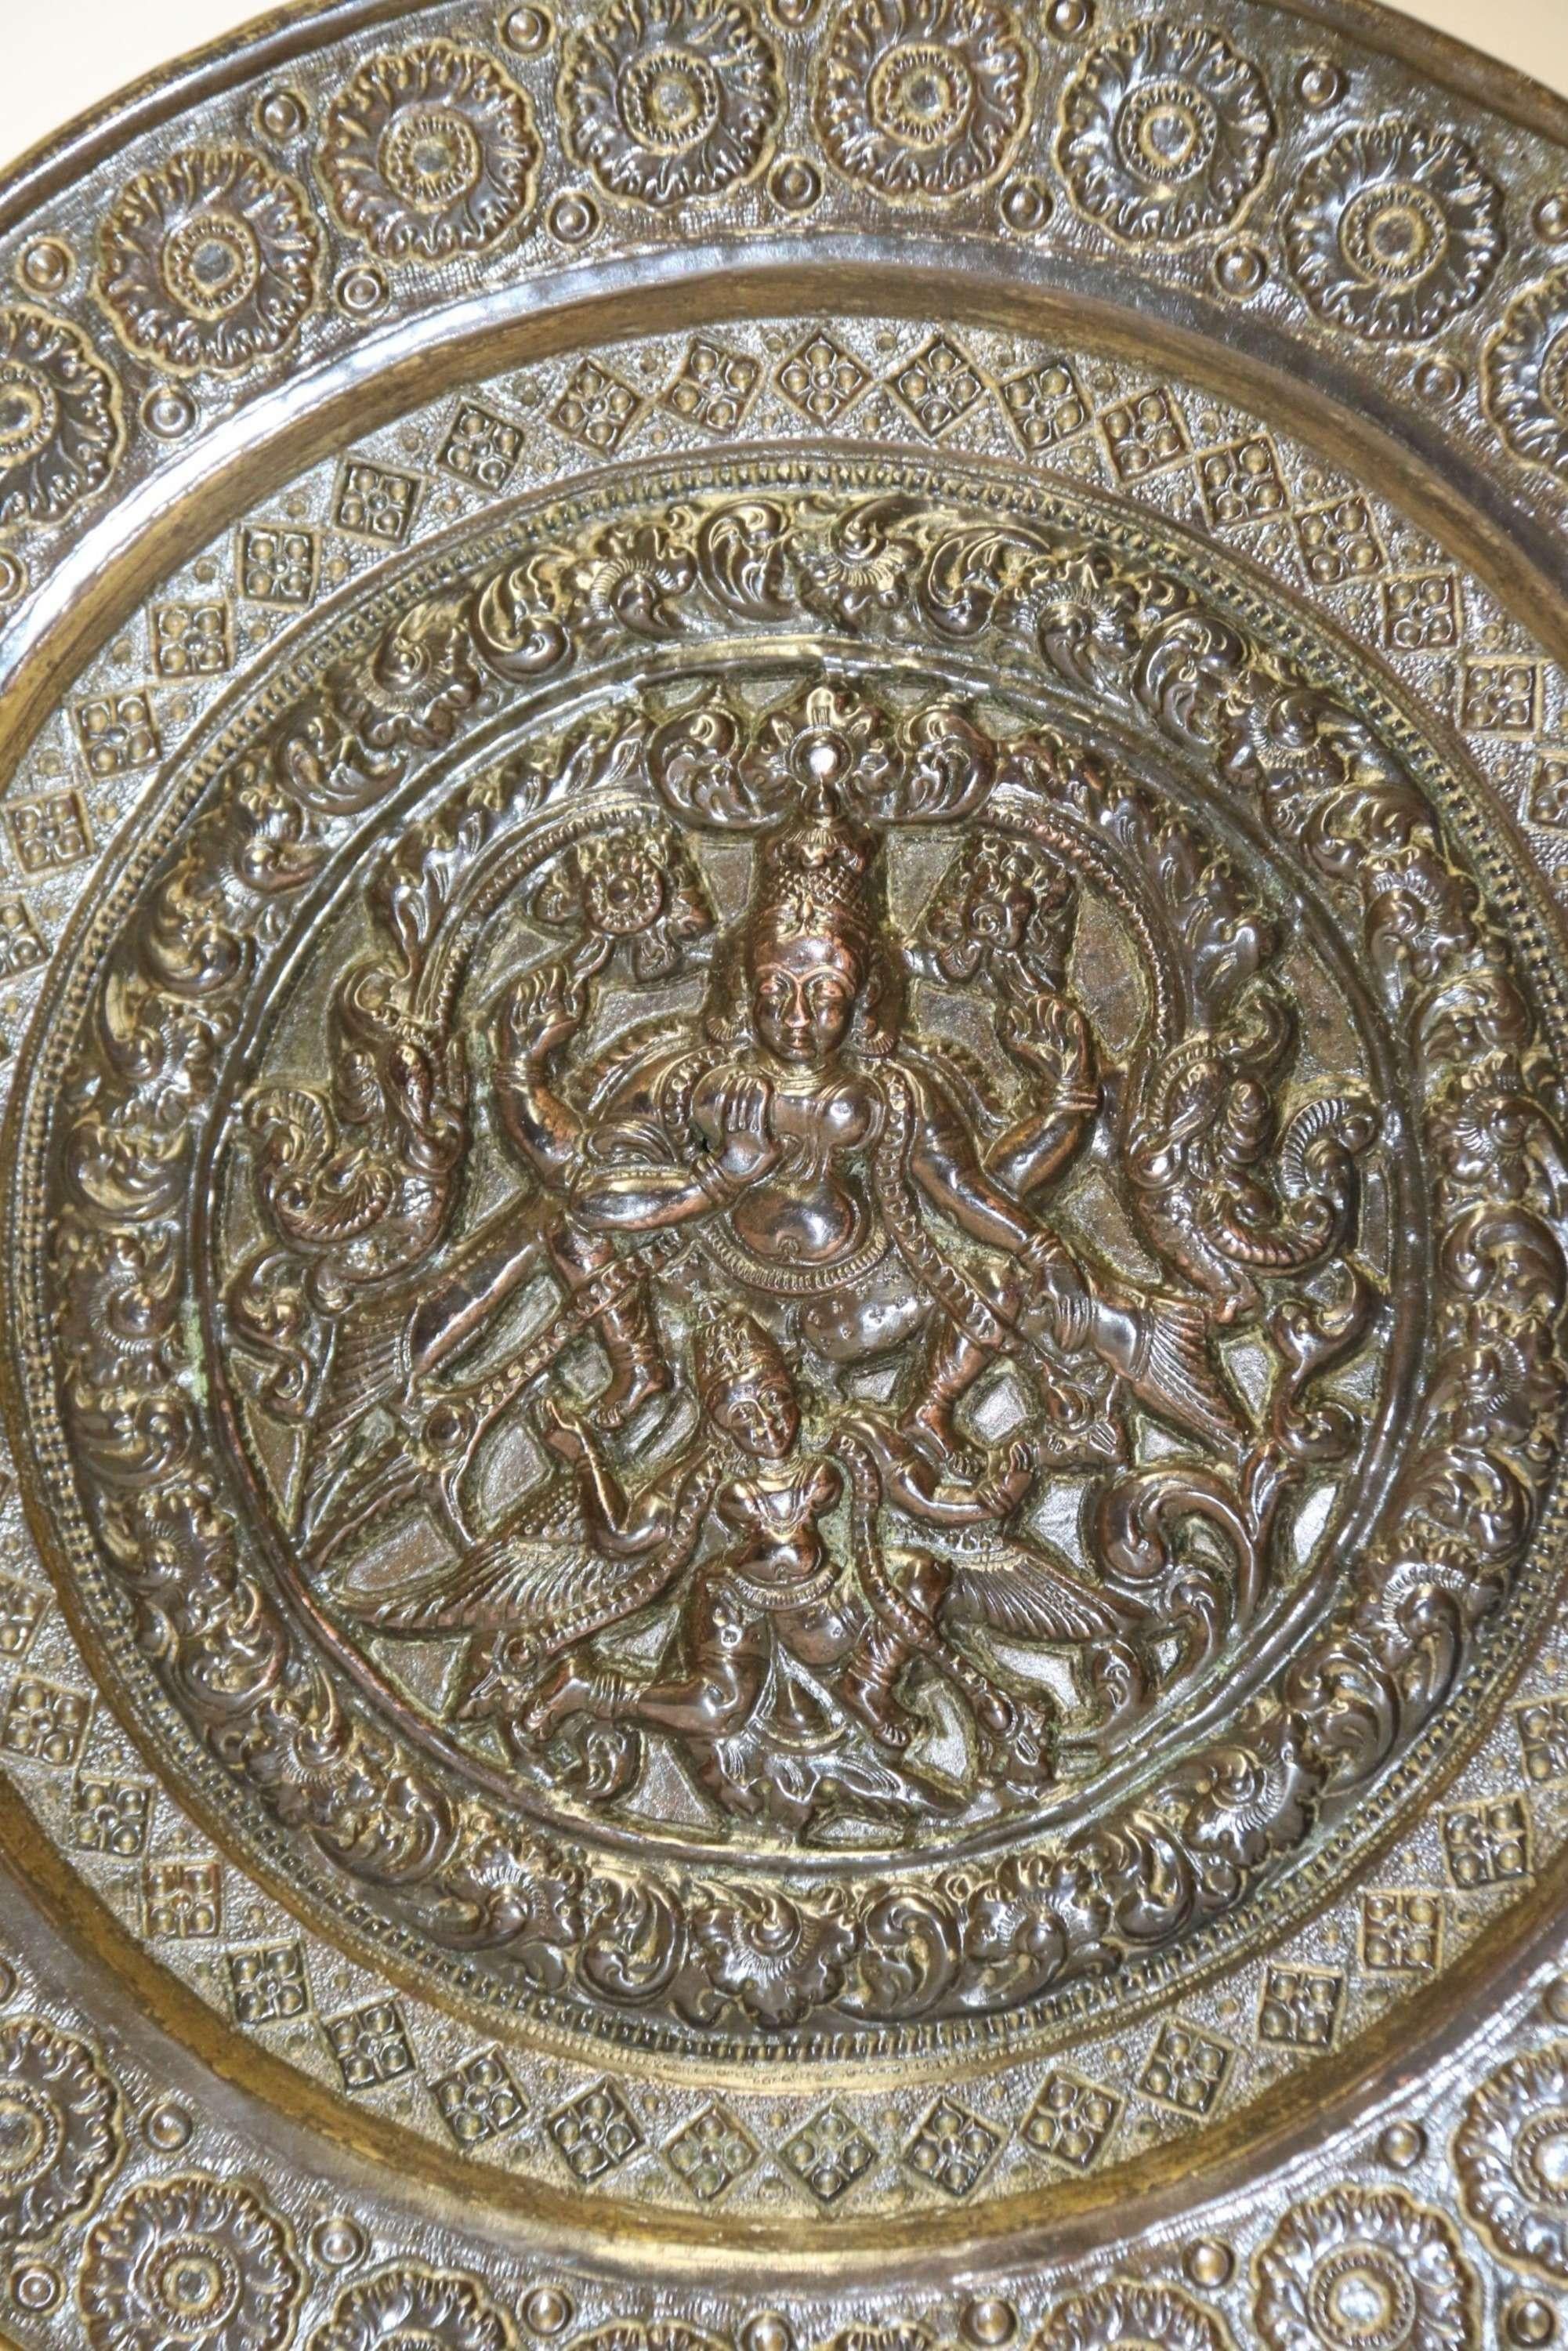 A 19th C Indian Raj Period Plaque

This finely crafted raised and chased Indian Raj period copper and brass plaque has an intricately worked central panel depicting Nataraga, the god of dance with exotic birds. Around this central panel is a fine